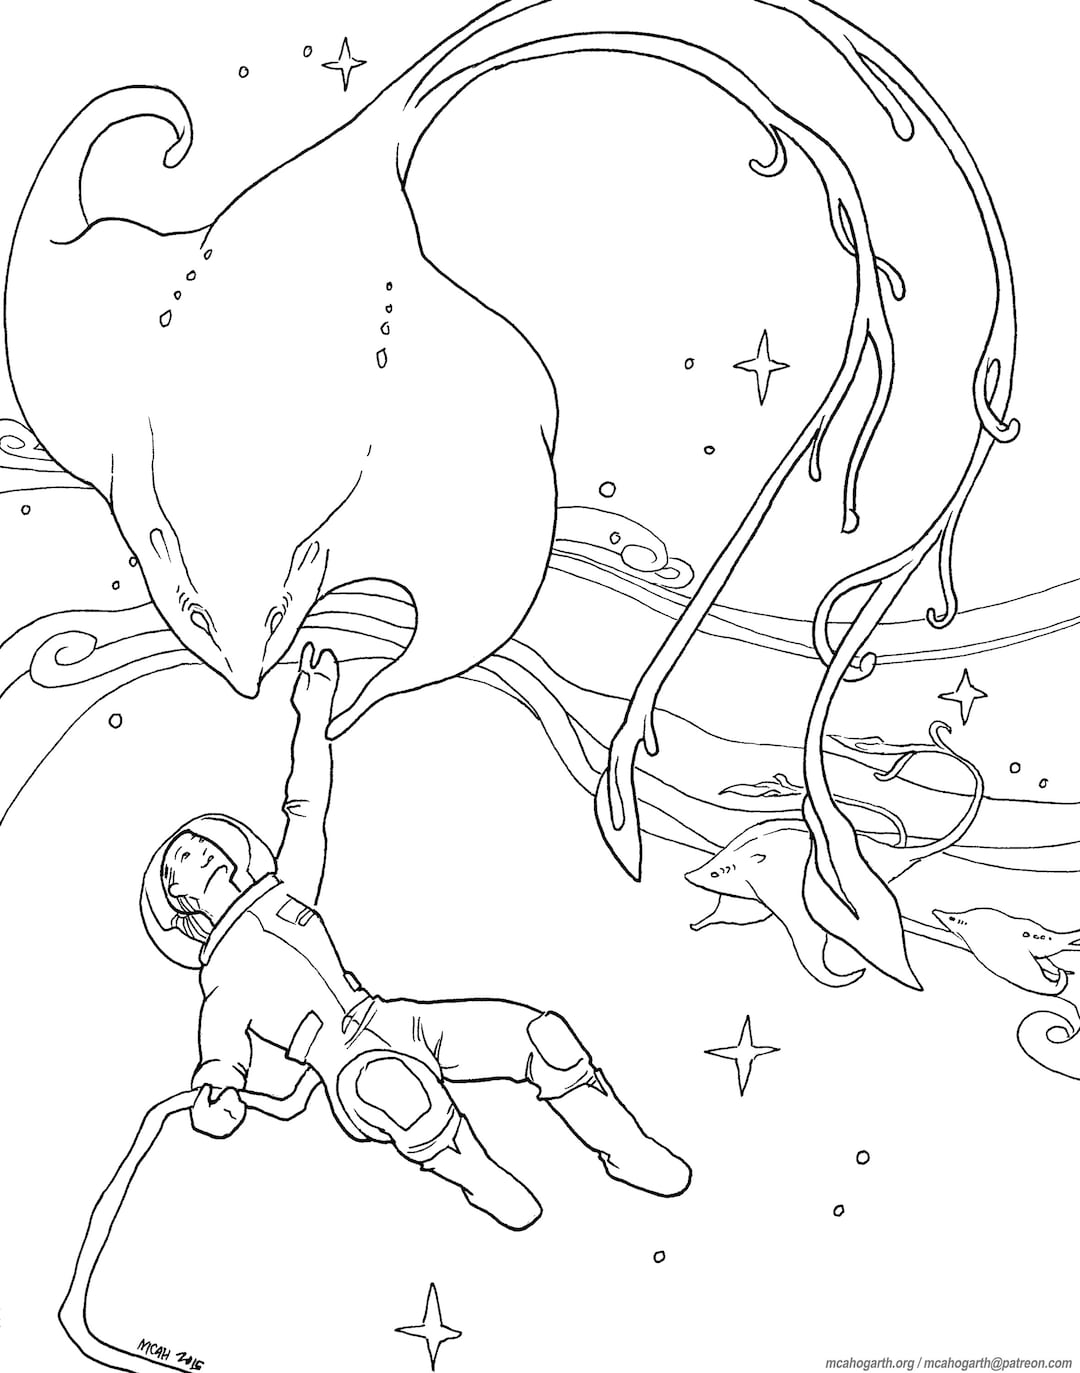 Space Ray Migration Coloring Page - Etsy